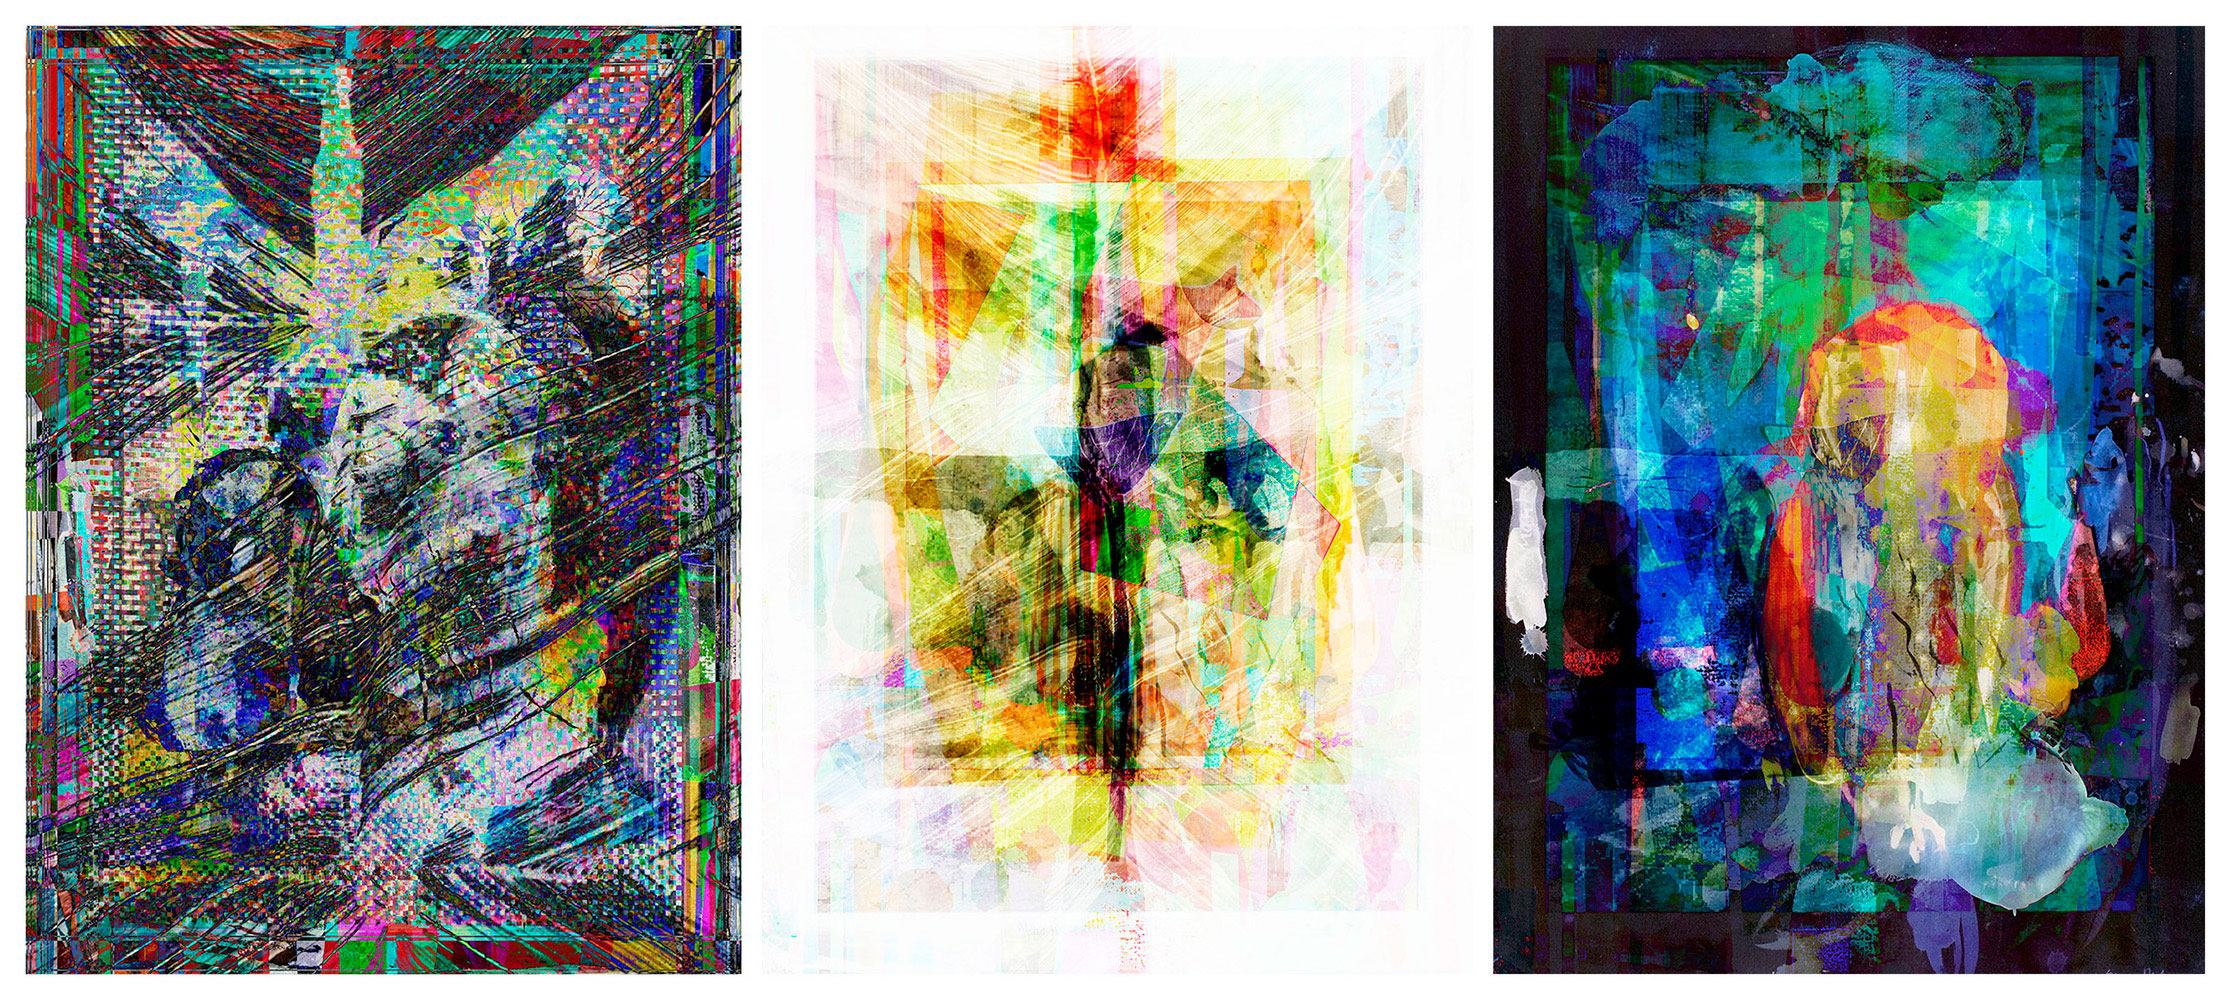 abstract digital works available as limited edition prints created from processing low resolution photos of other artists limited edition prints